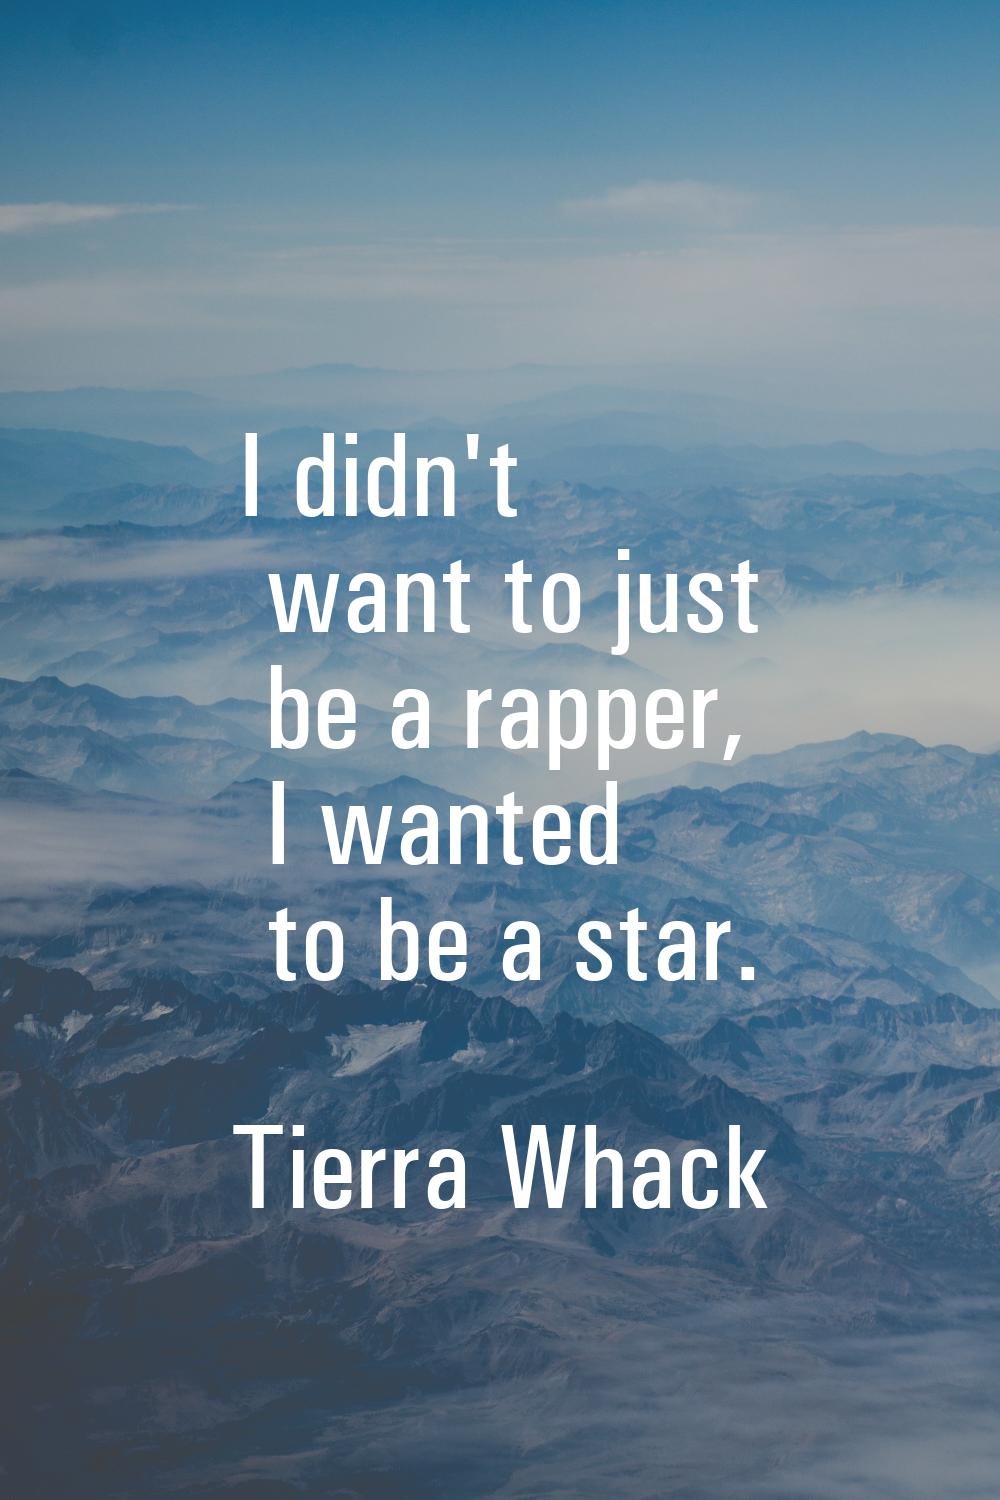 I didn't want to just be a rapper, I wanted to be a star.